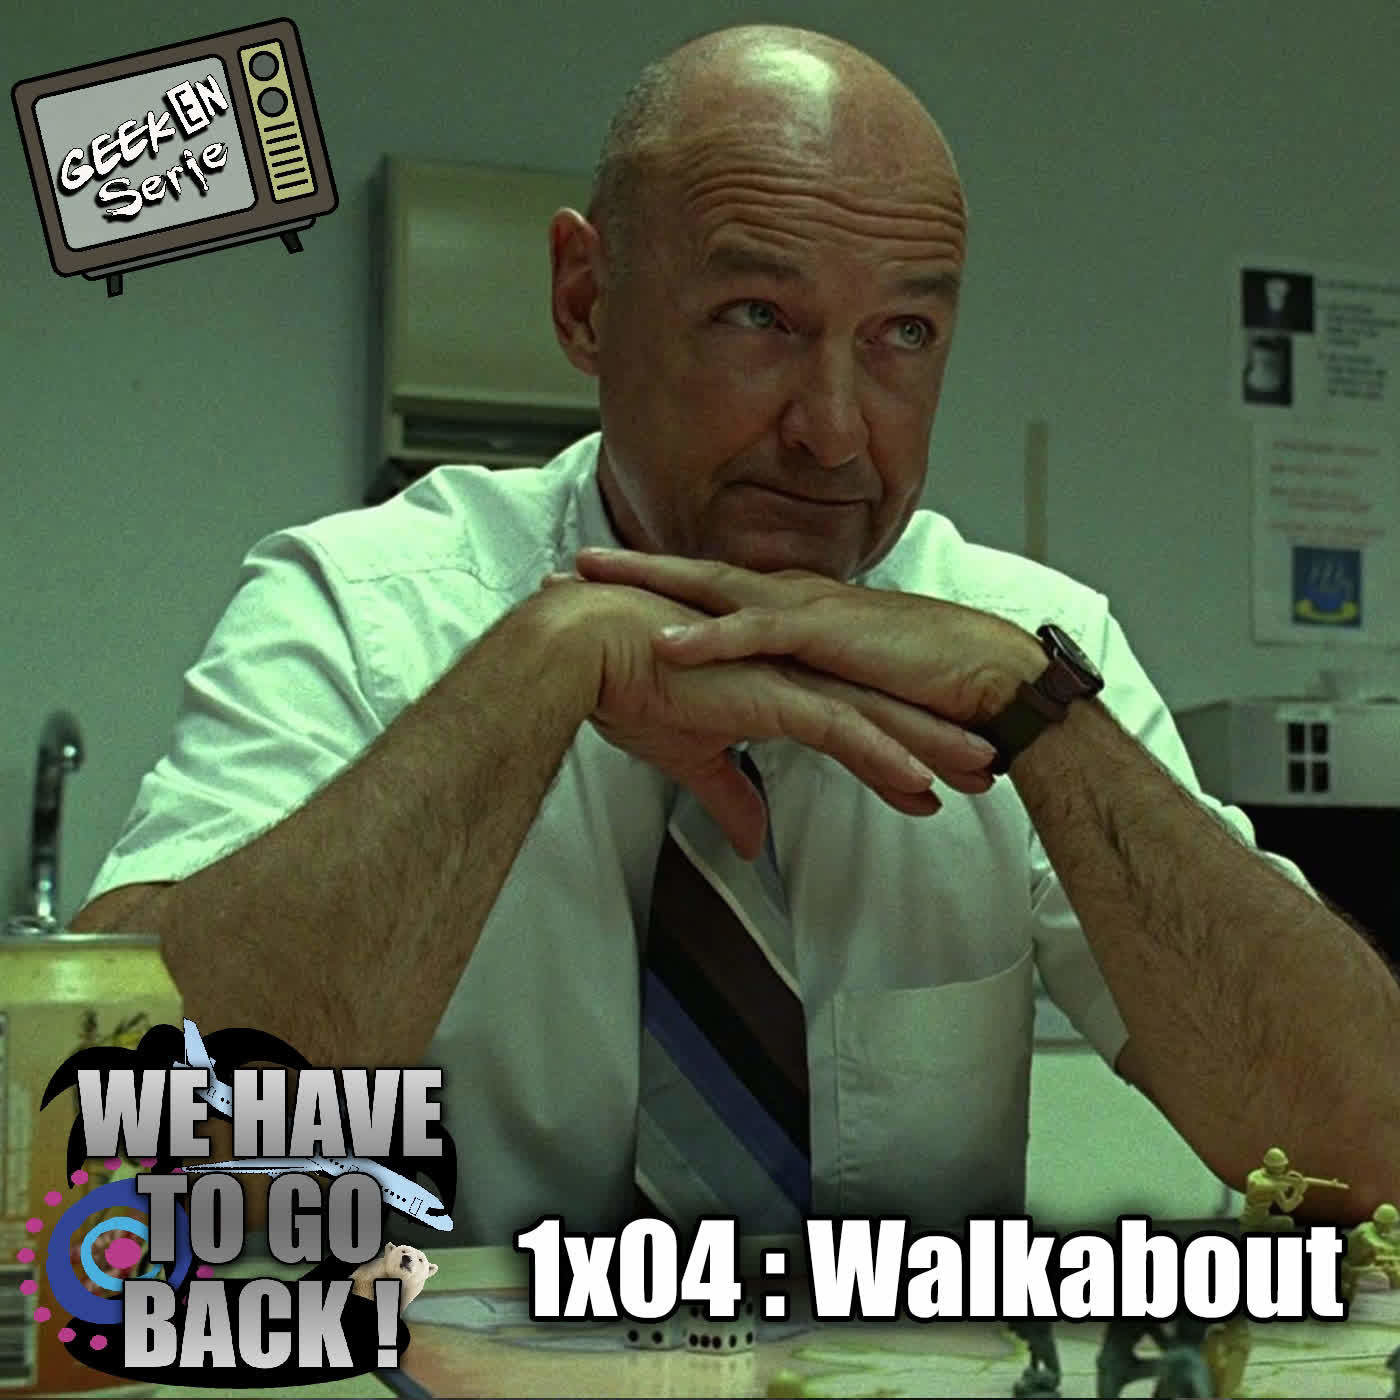 We Have to go back(rewatch Lost) 1×04: Walkabout